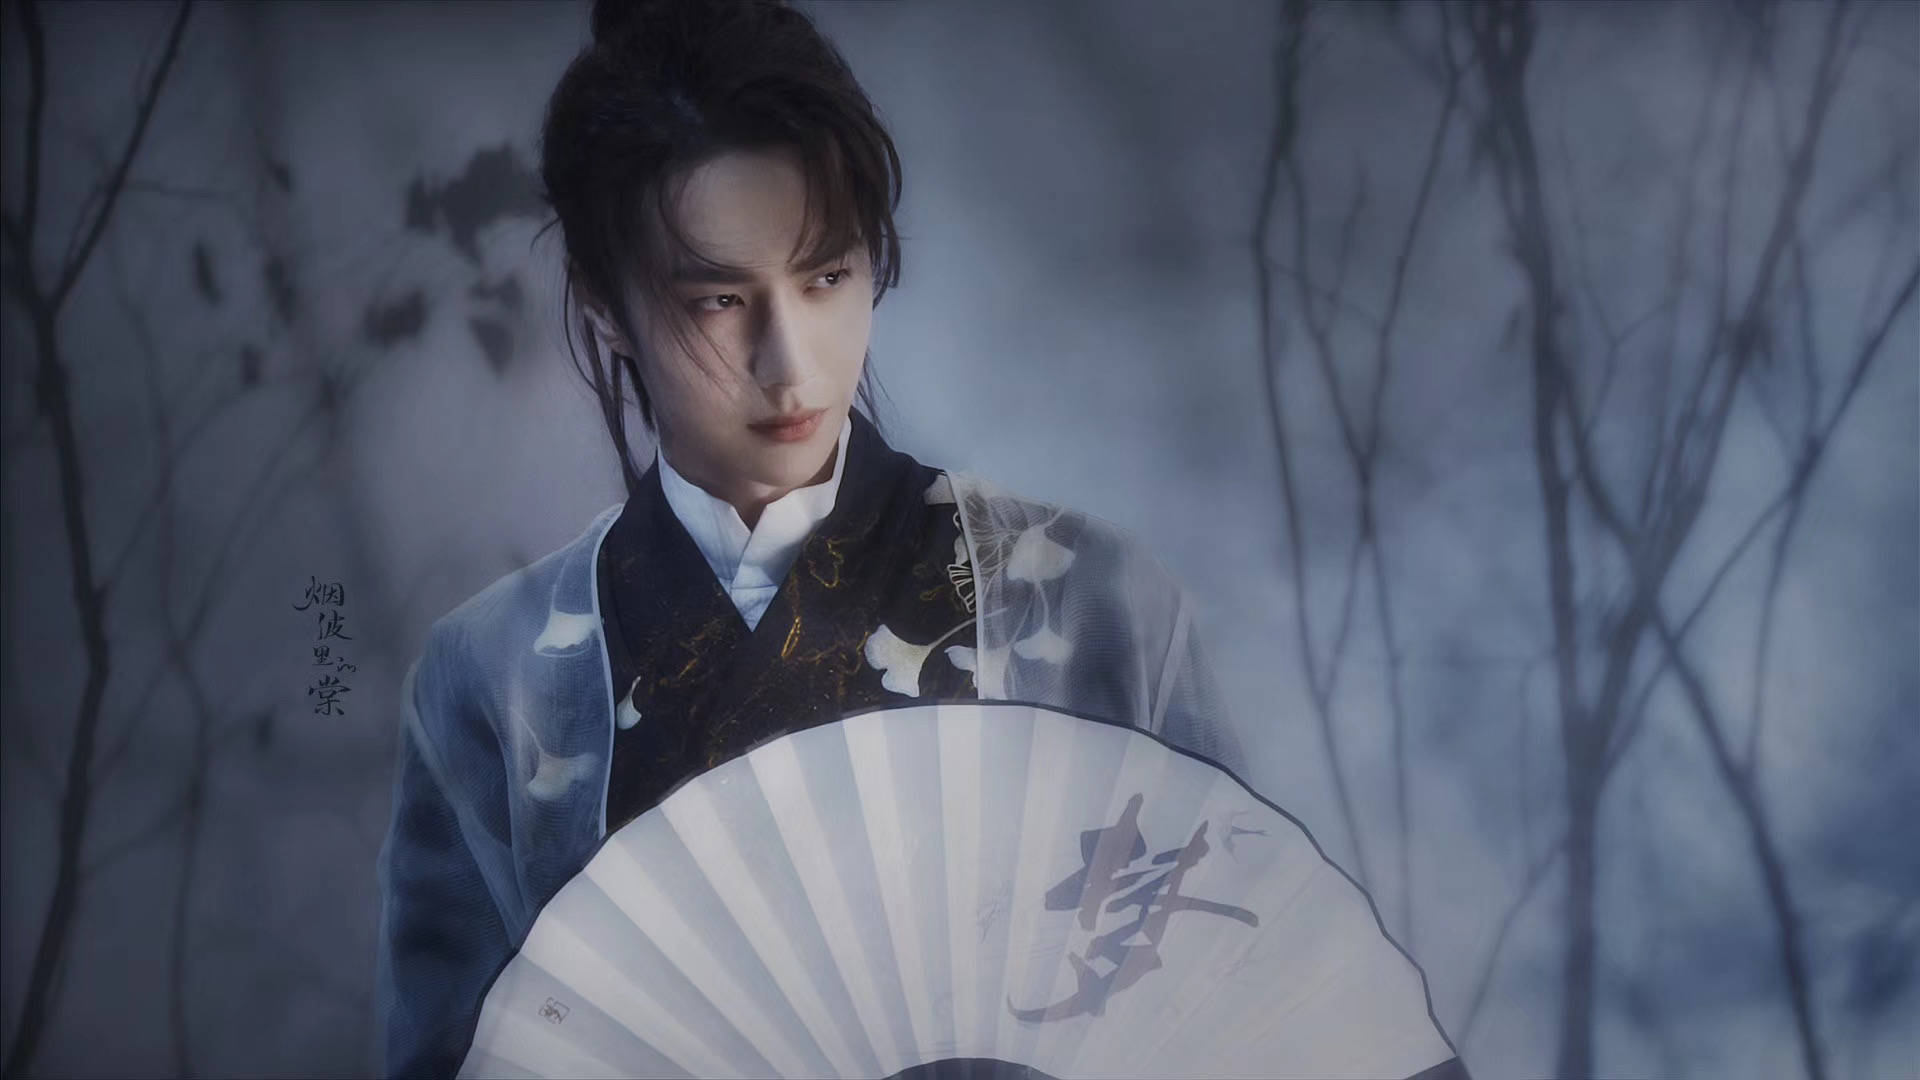 Wang Yibo Elegantly Stands Dominant In Traditional Fashion